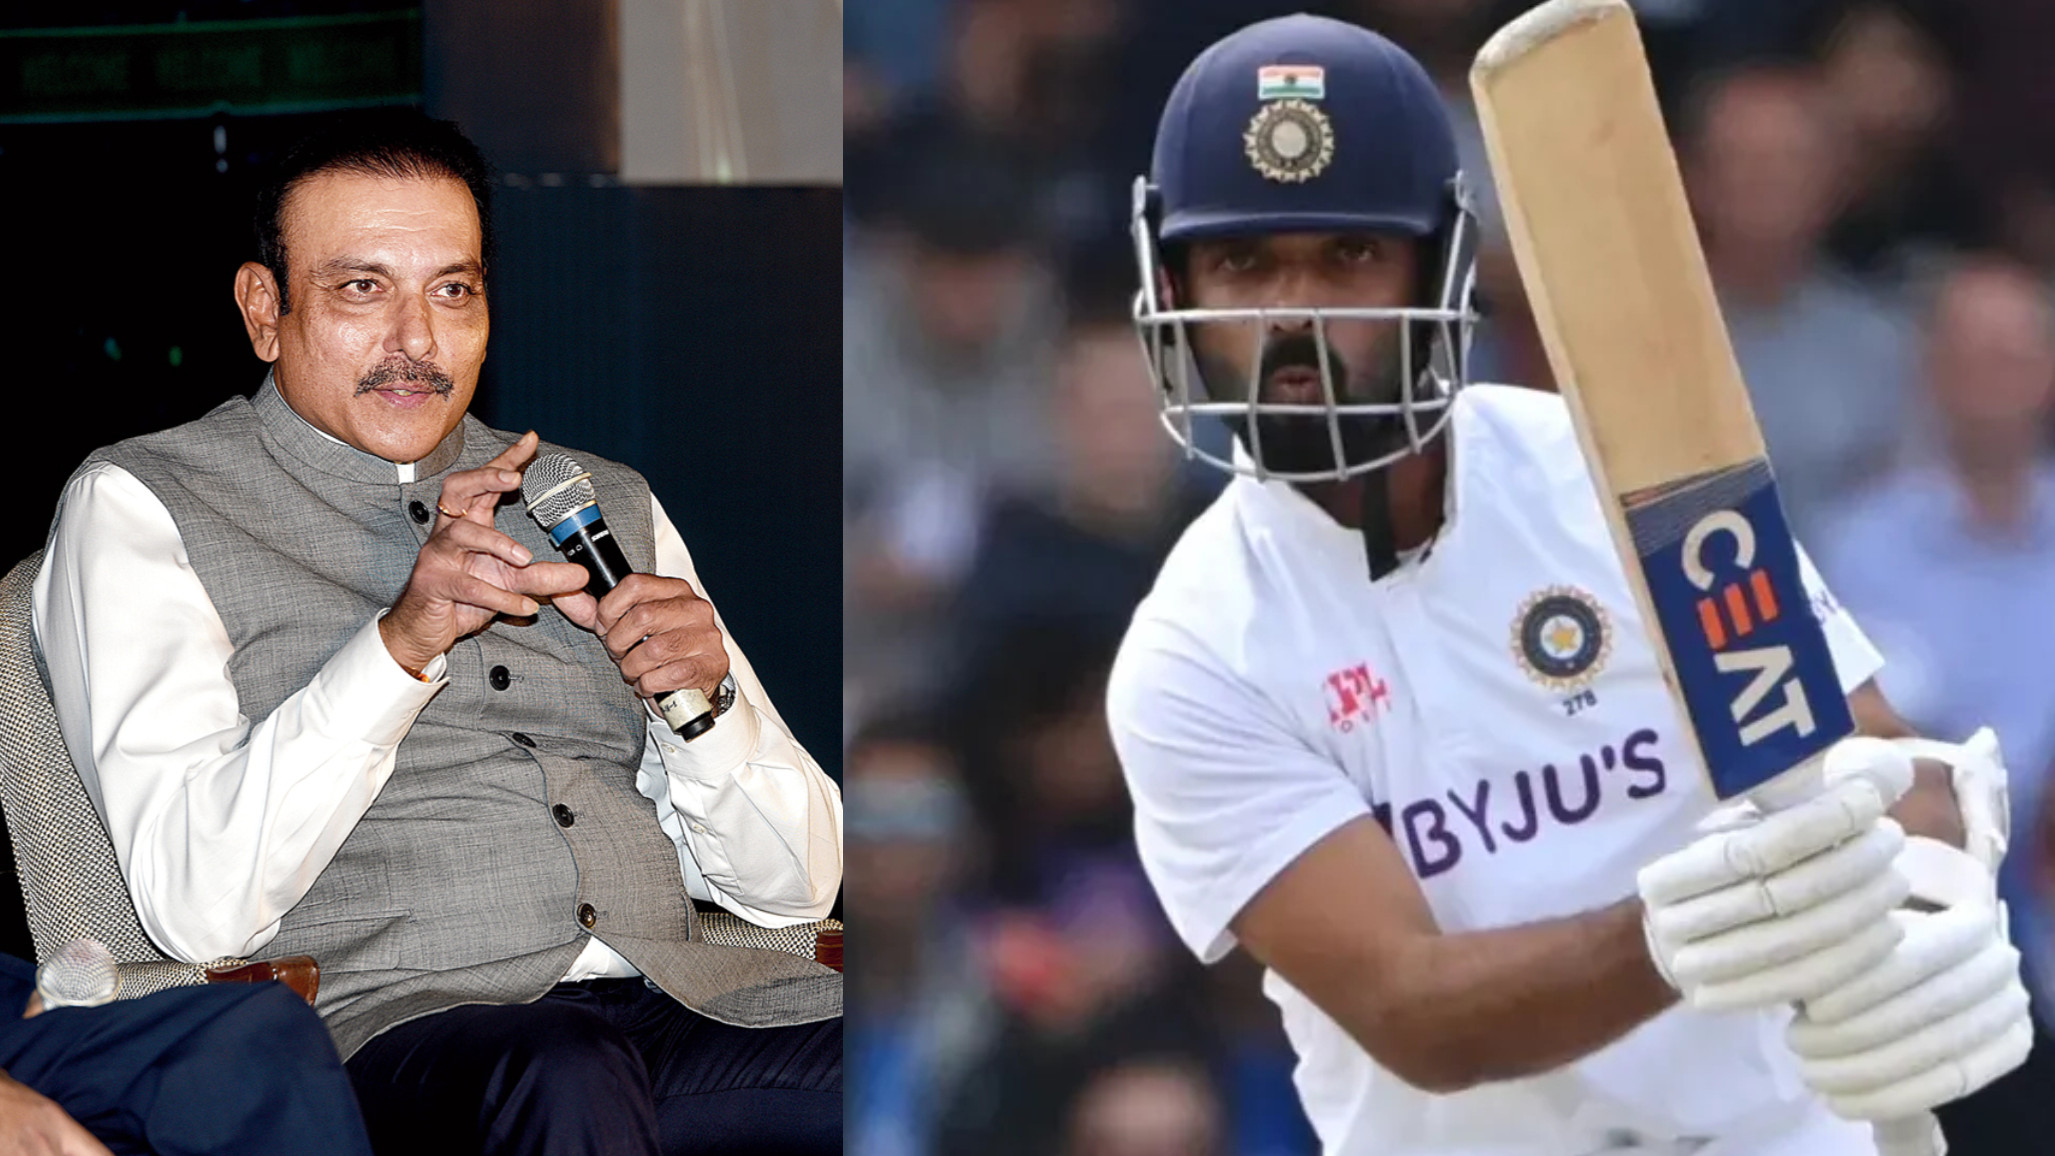 “It’s a one-off big game, you need your experienced player”- Shastri on Rahane’s inclusion in India’s WTC final squad